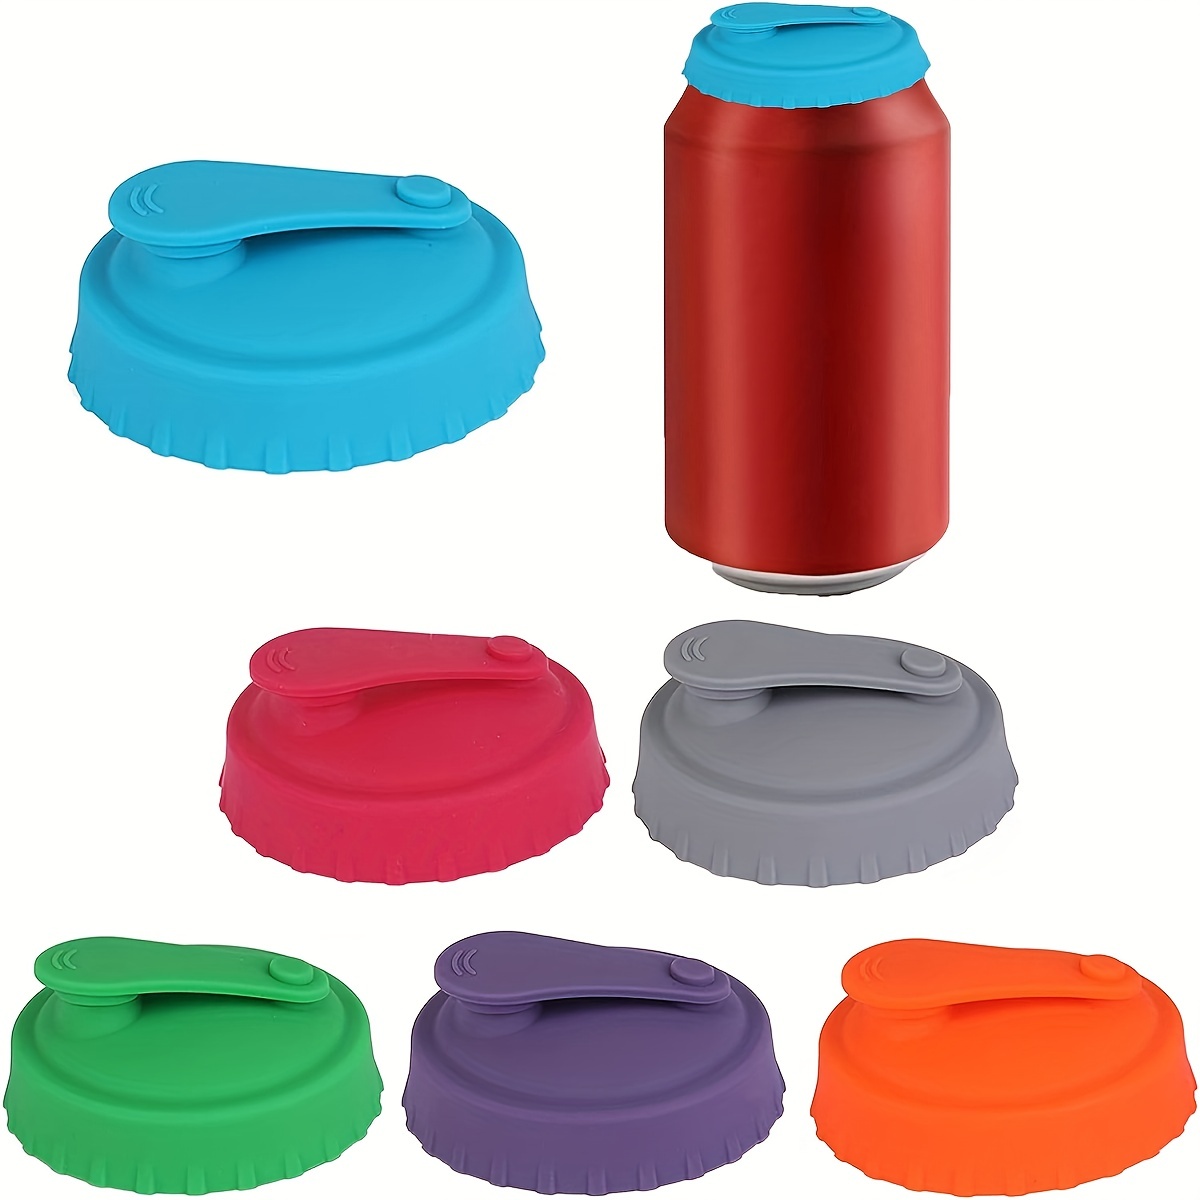 Leinuosen 18 Pcs Silicone Soda Can Covers Lids Reusable Can Covers for Soda  Lid Pop Can Cover Standard Toppers for Soda with Resealable Nozzle Can